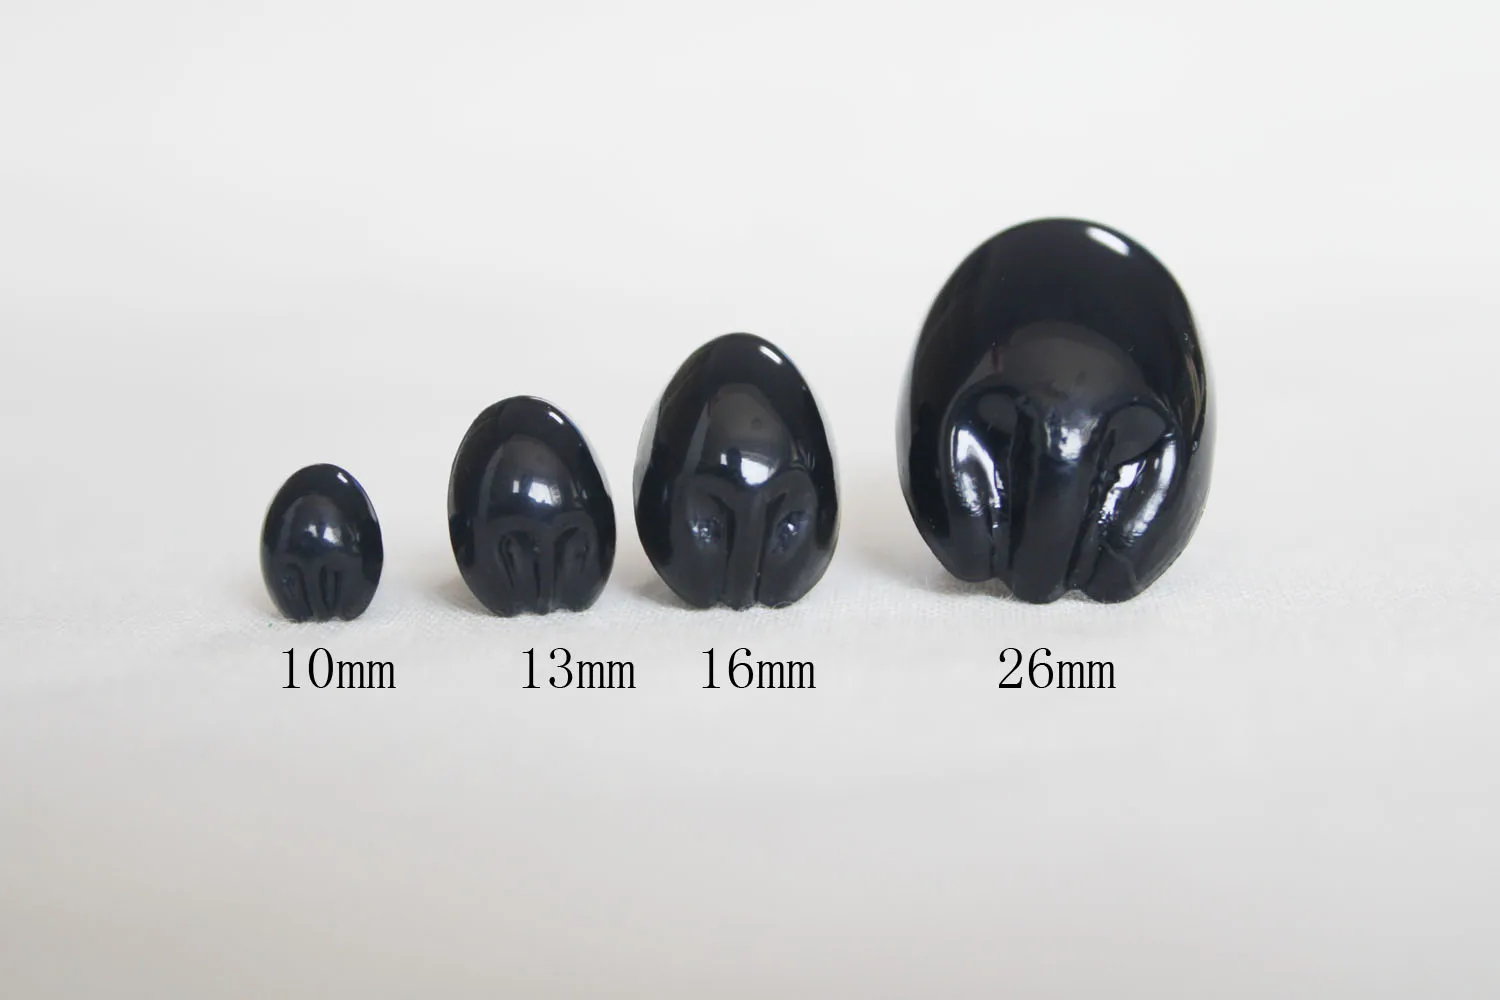 

20pcs 10mm 13mm 16mm 26mmblack safety toy animal toy doll noses + washer plush doll accessories size option